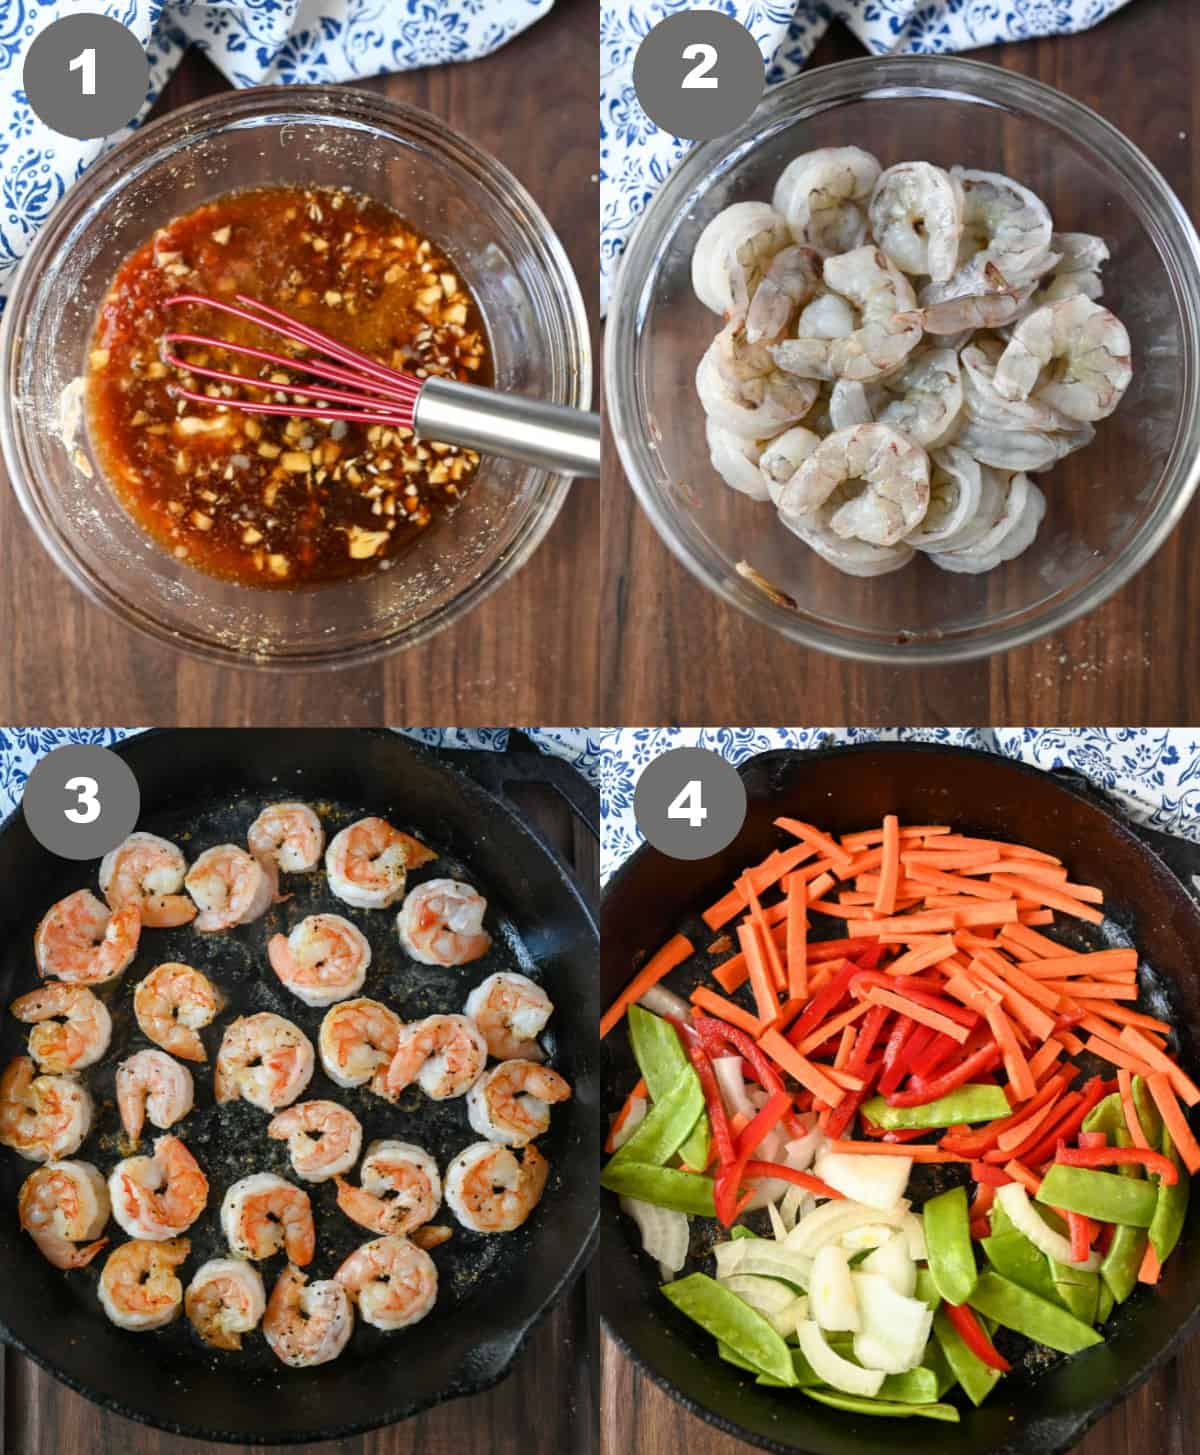 Sauce in a bowl, and shrimp in a bowl then cooked in a skillet.